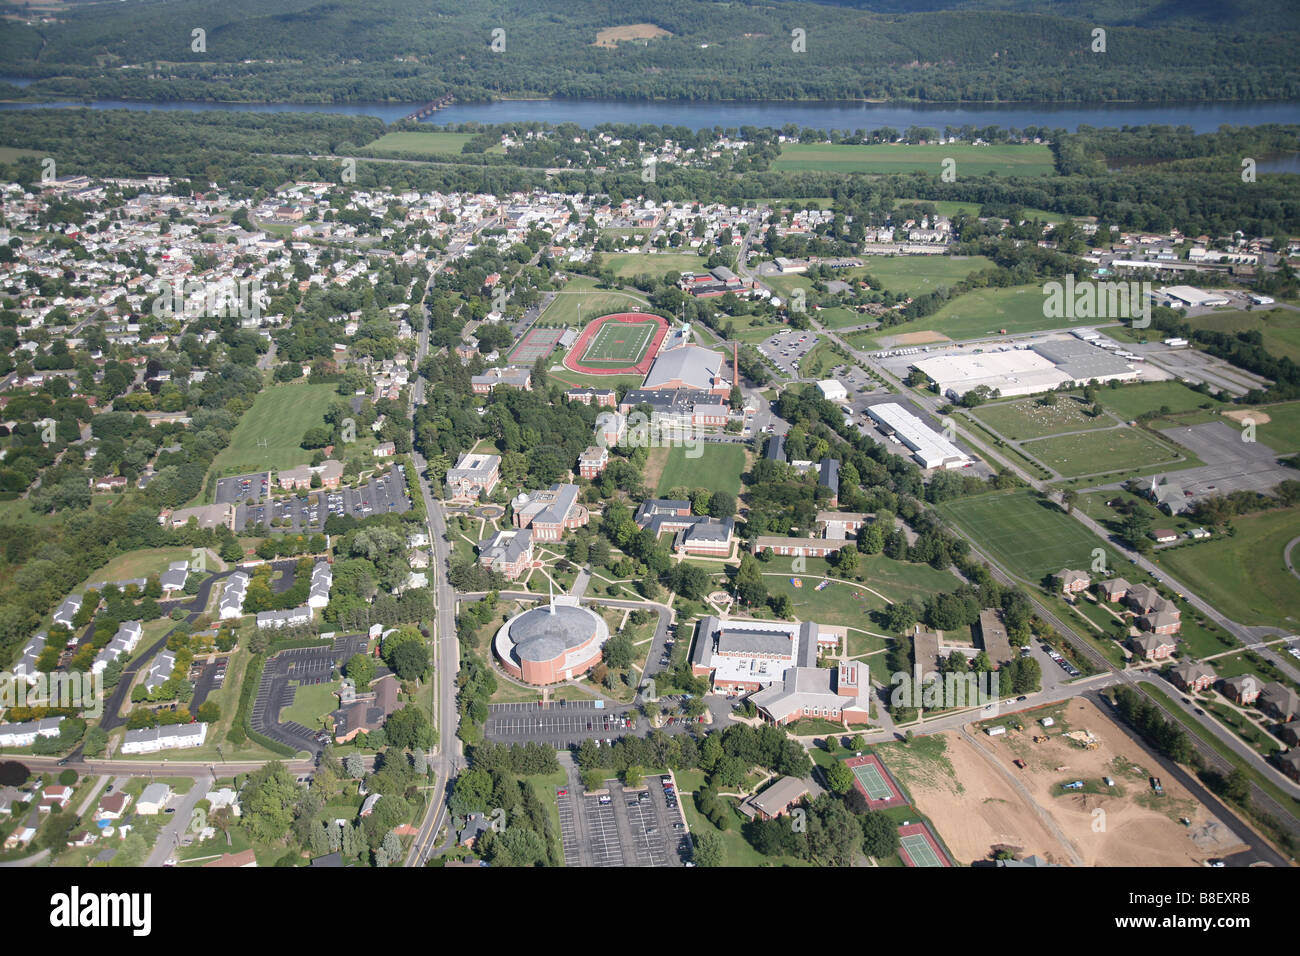 Aerial view of Susquehanna University located in Selinsgrove, Pennsylvania Stock Photo